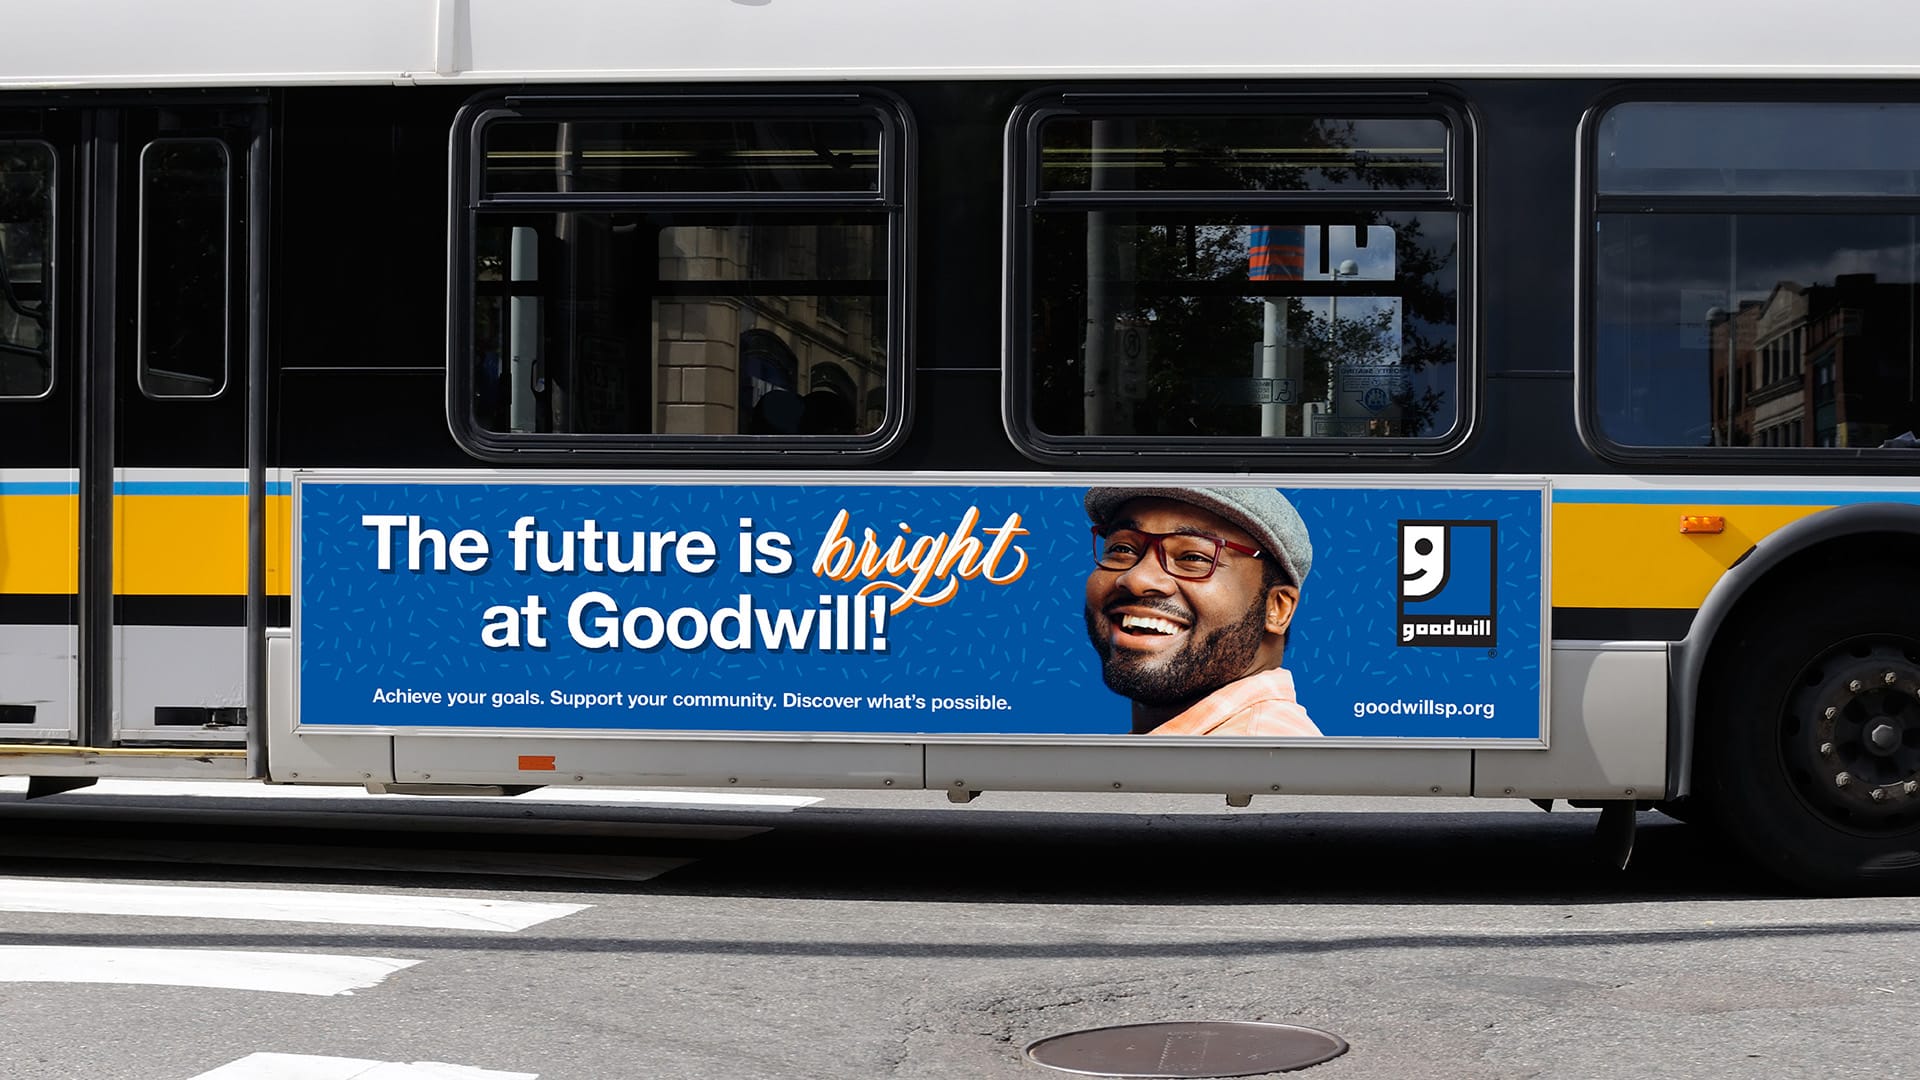 Goodwill Industries of the Southern Piedmont